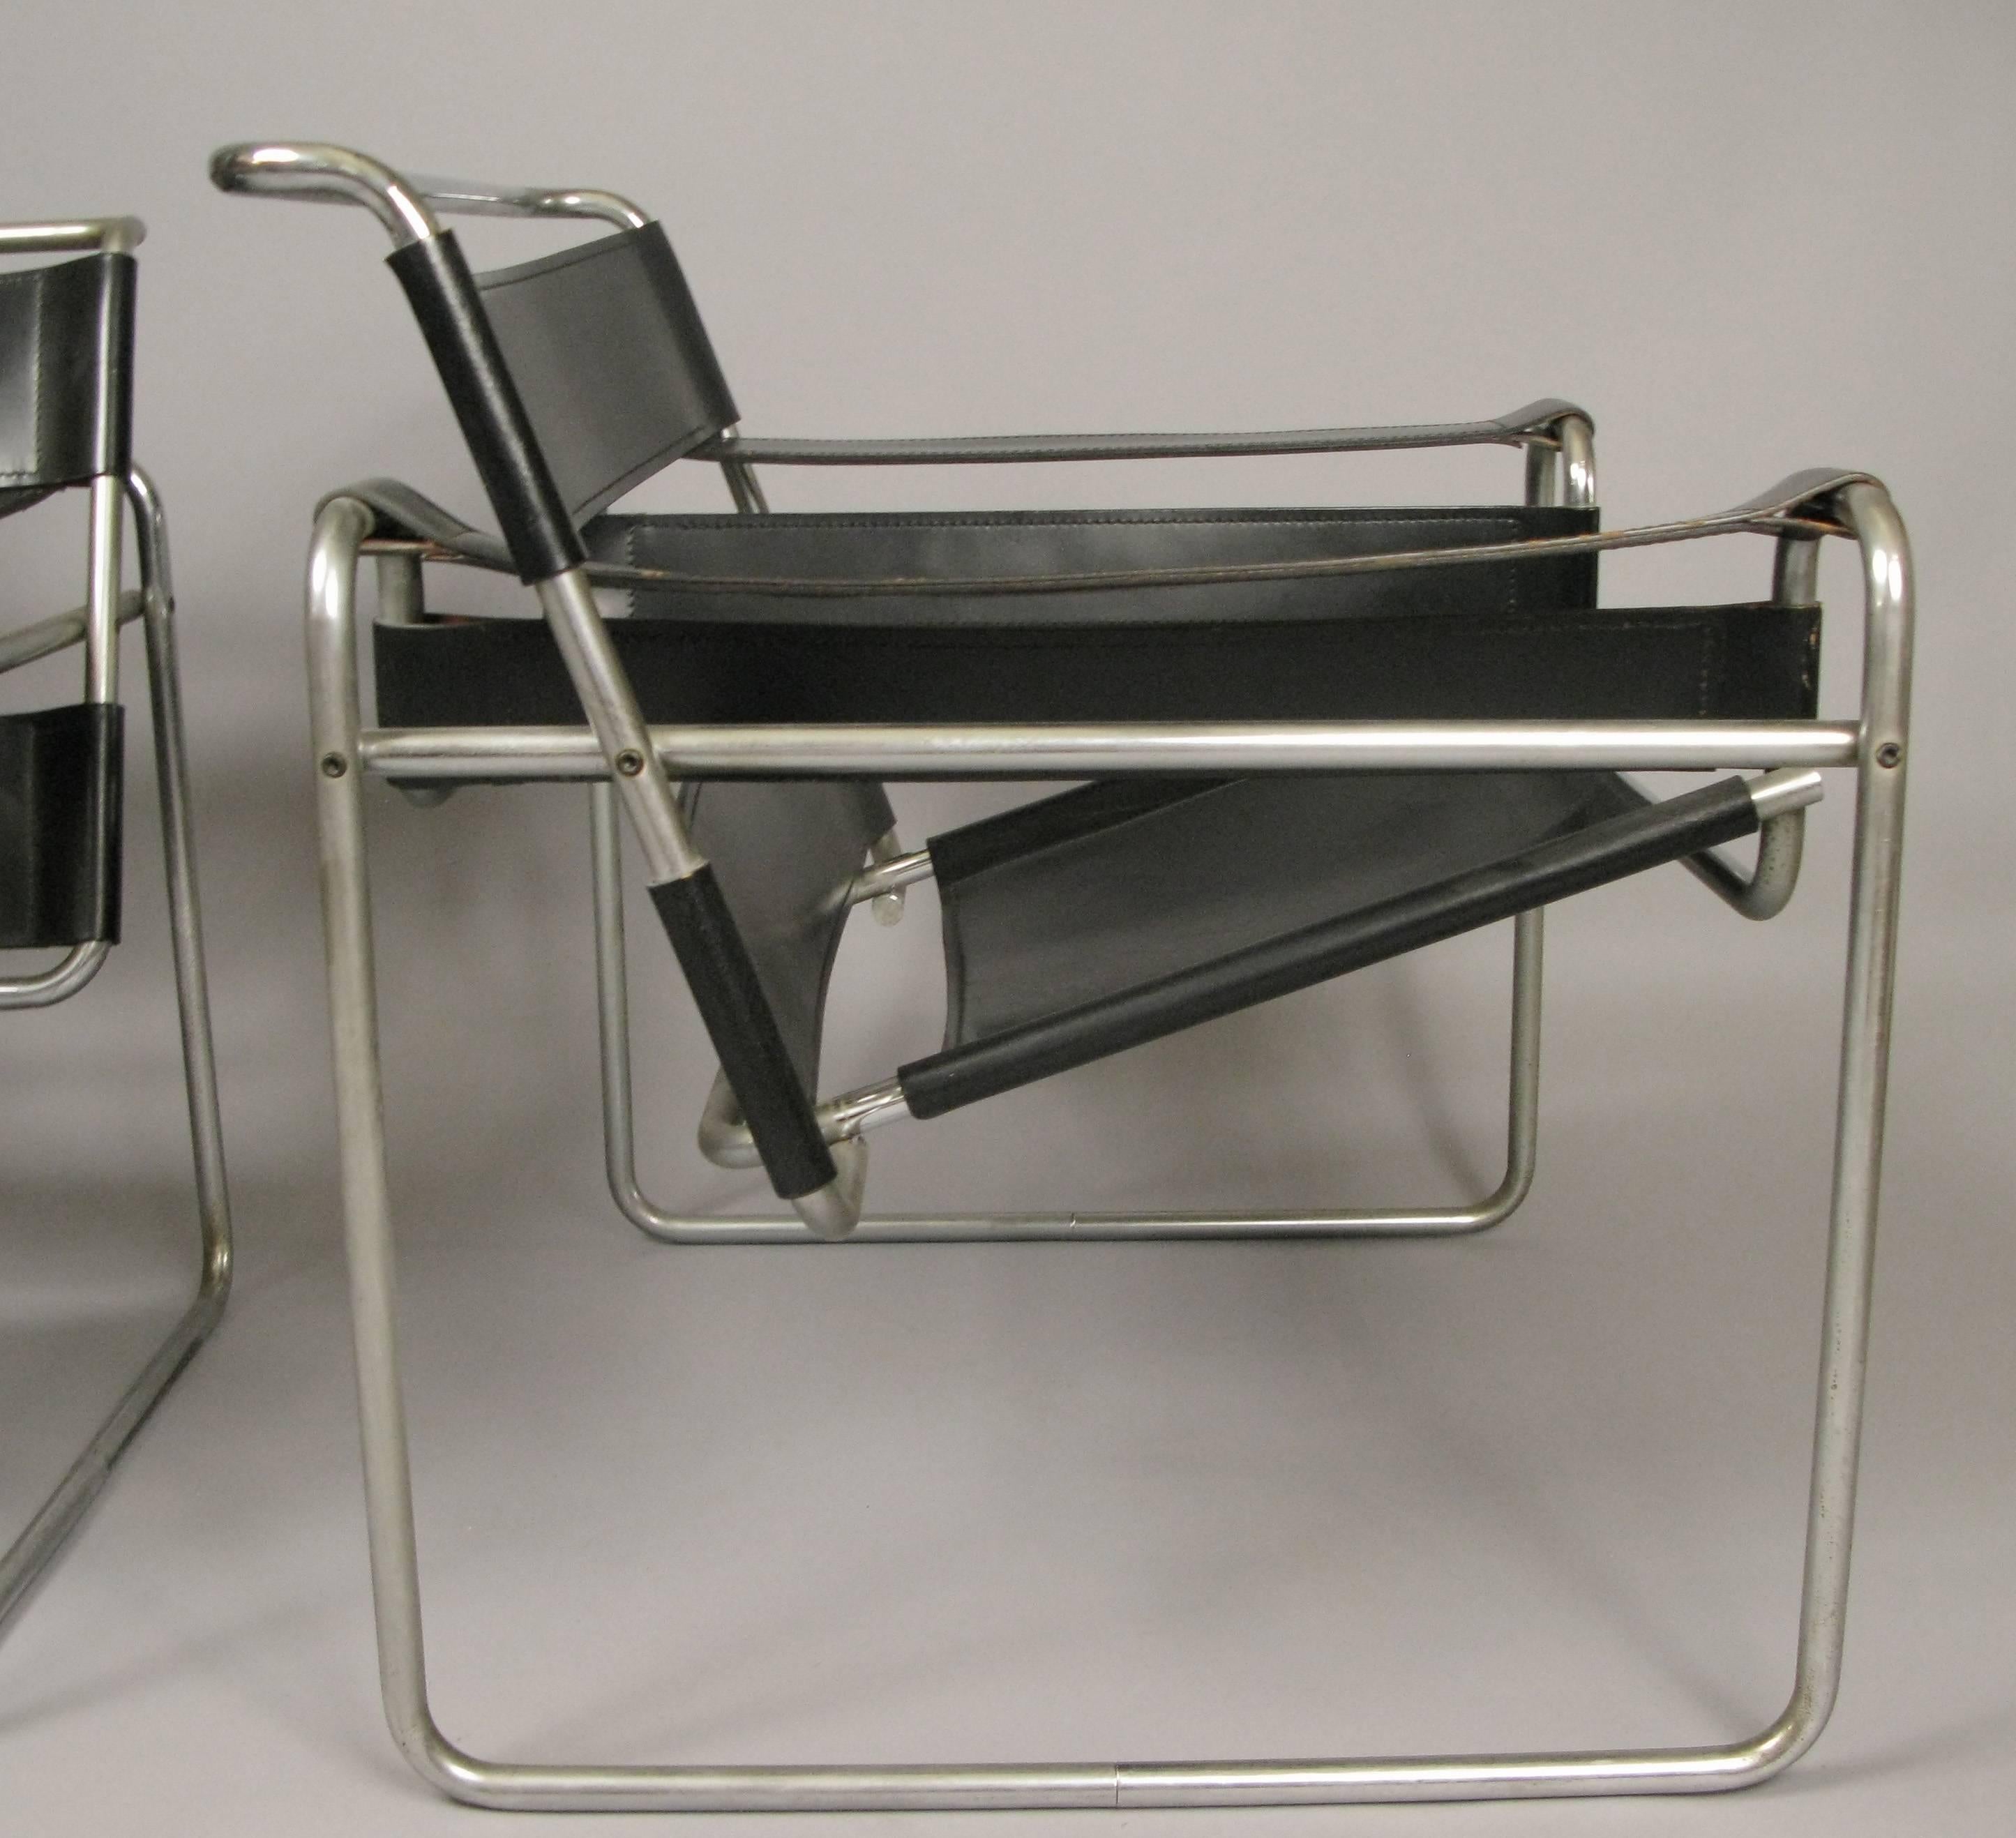 A pair of Classic vintage modern steel and leather lounge chairs designed by Marcel Breuer in 1925 and made by Knoll in the 1970s. Very good condition.